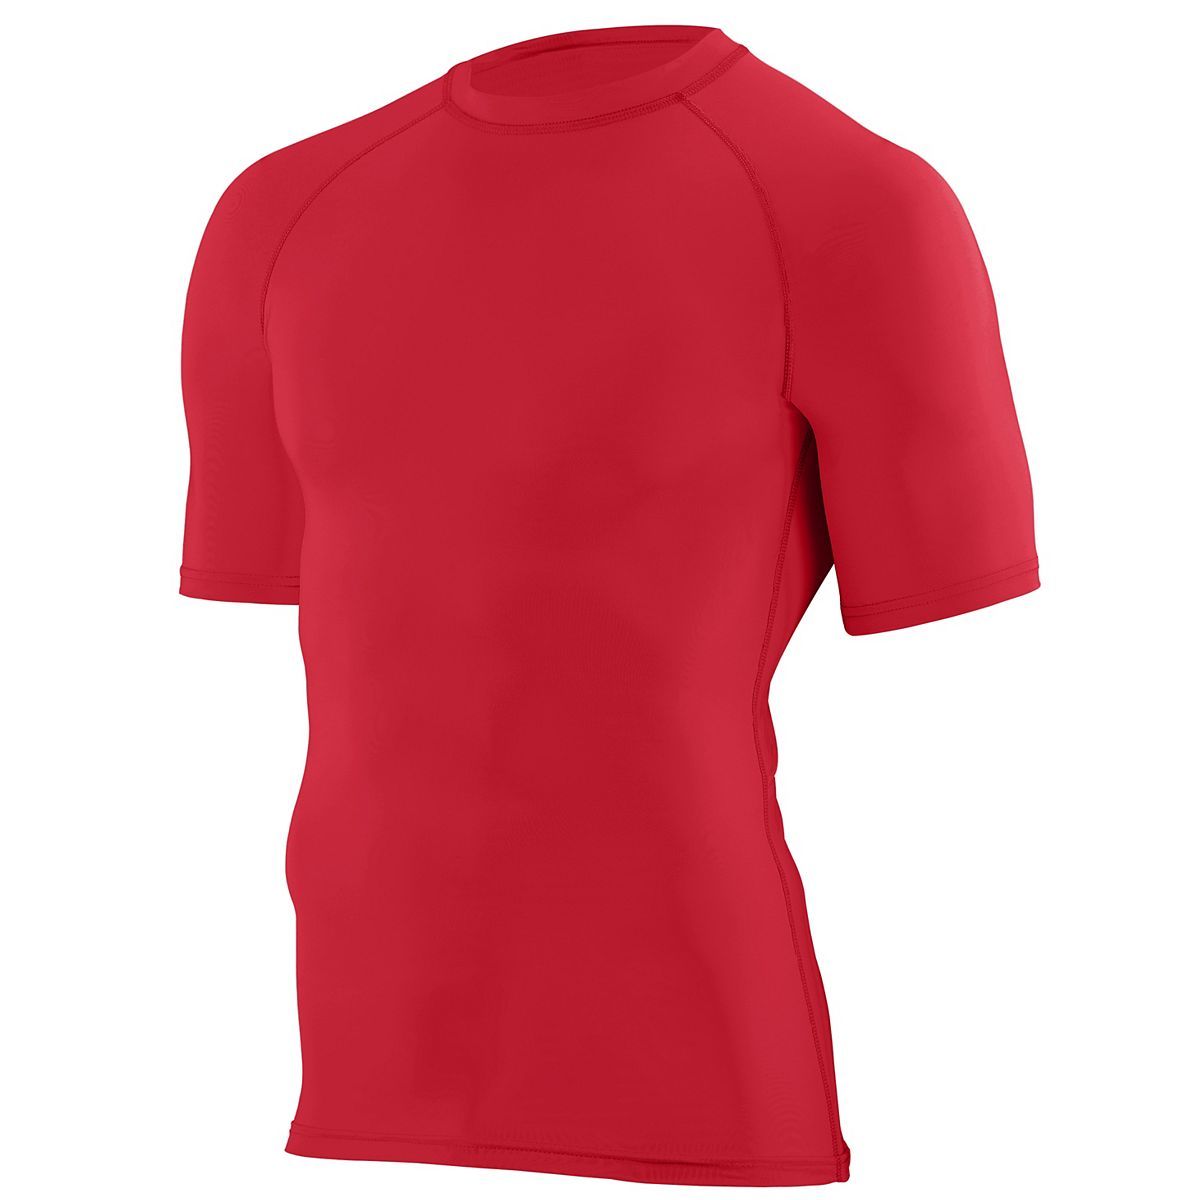 Youth Hyperform Compression Short Sleeve Tee 2601